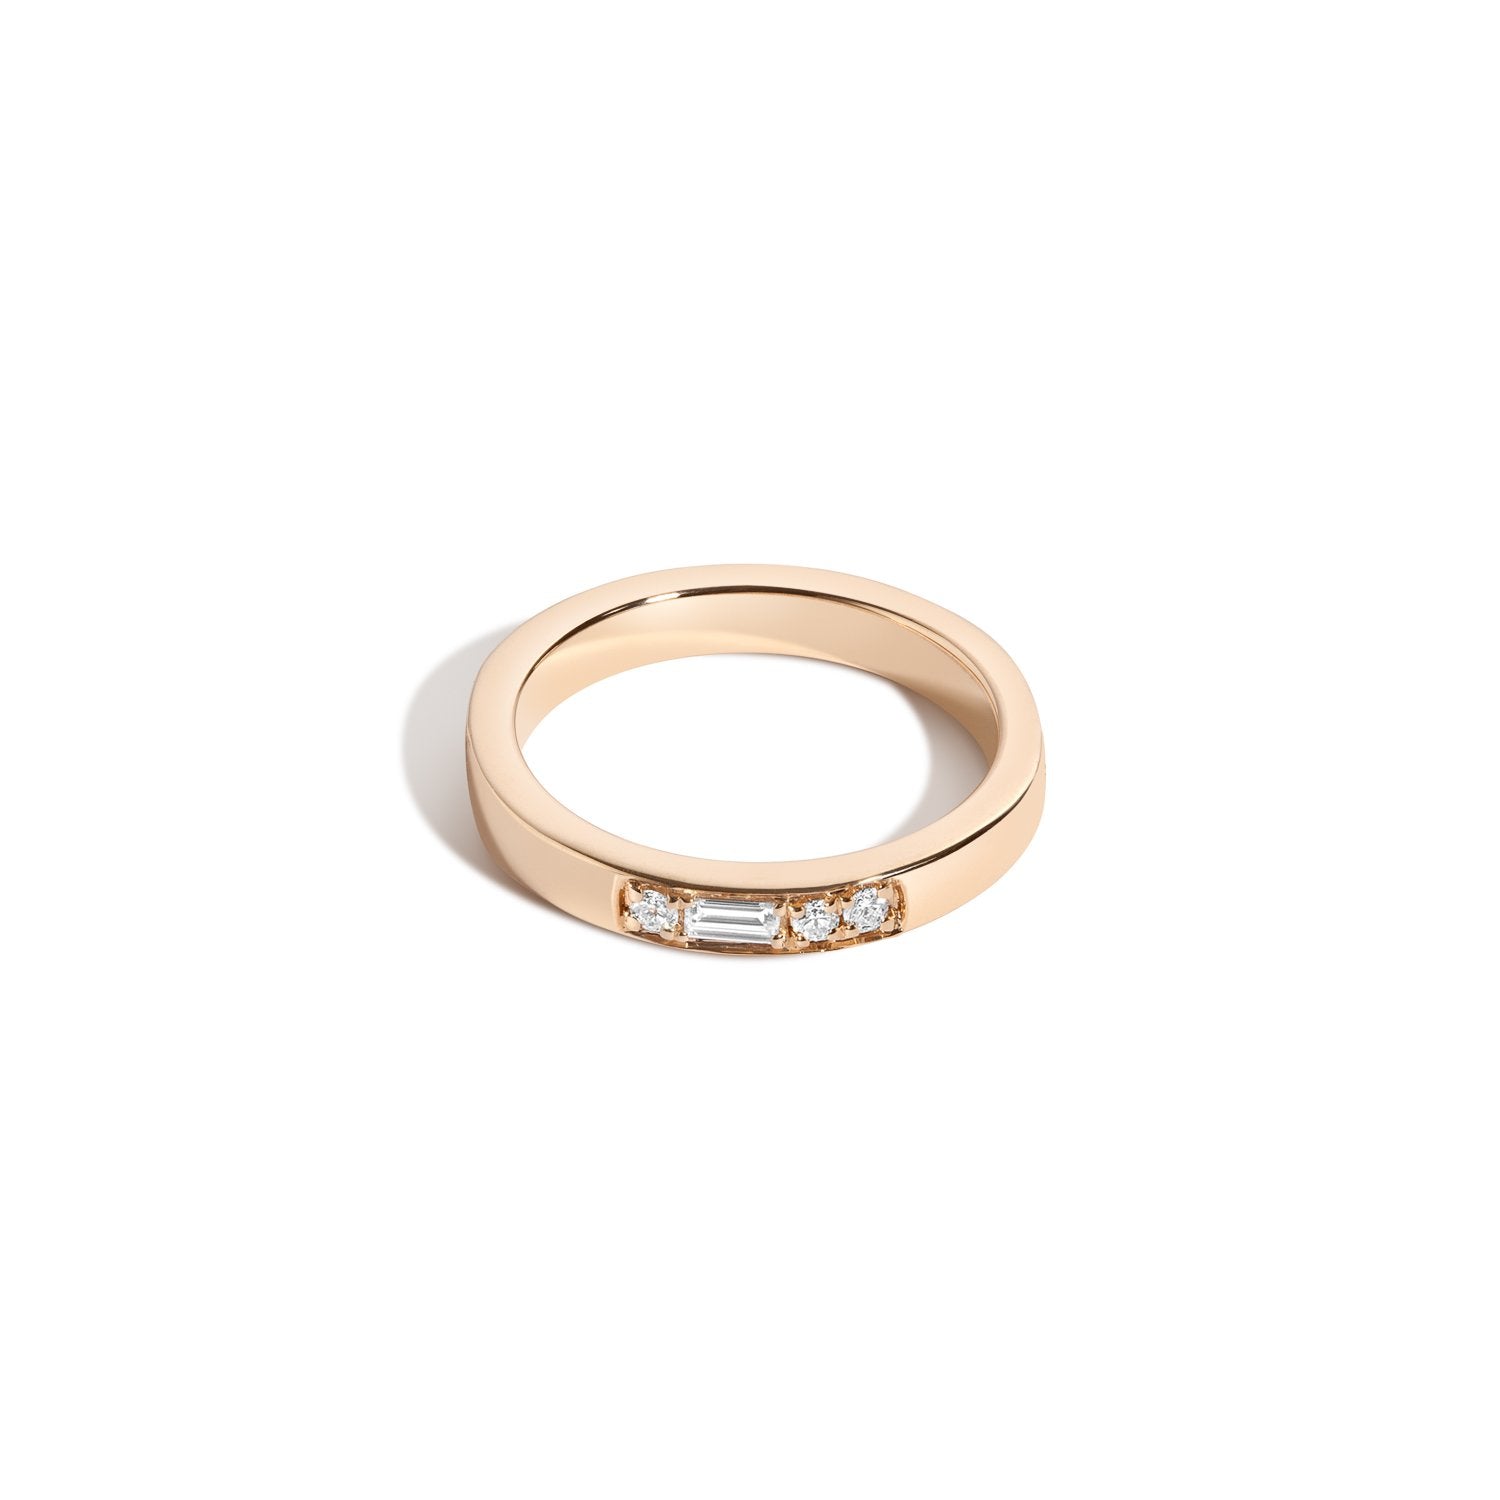 Shahla Karimi Jewelry Morse Code Series Ring 14K Yellow Gold - Letter "L"